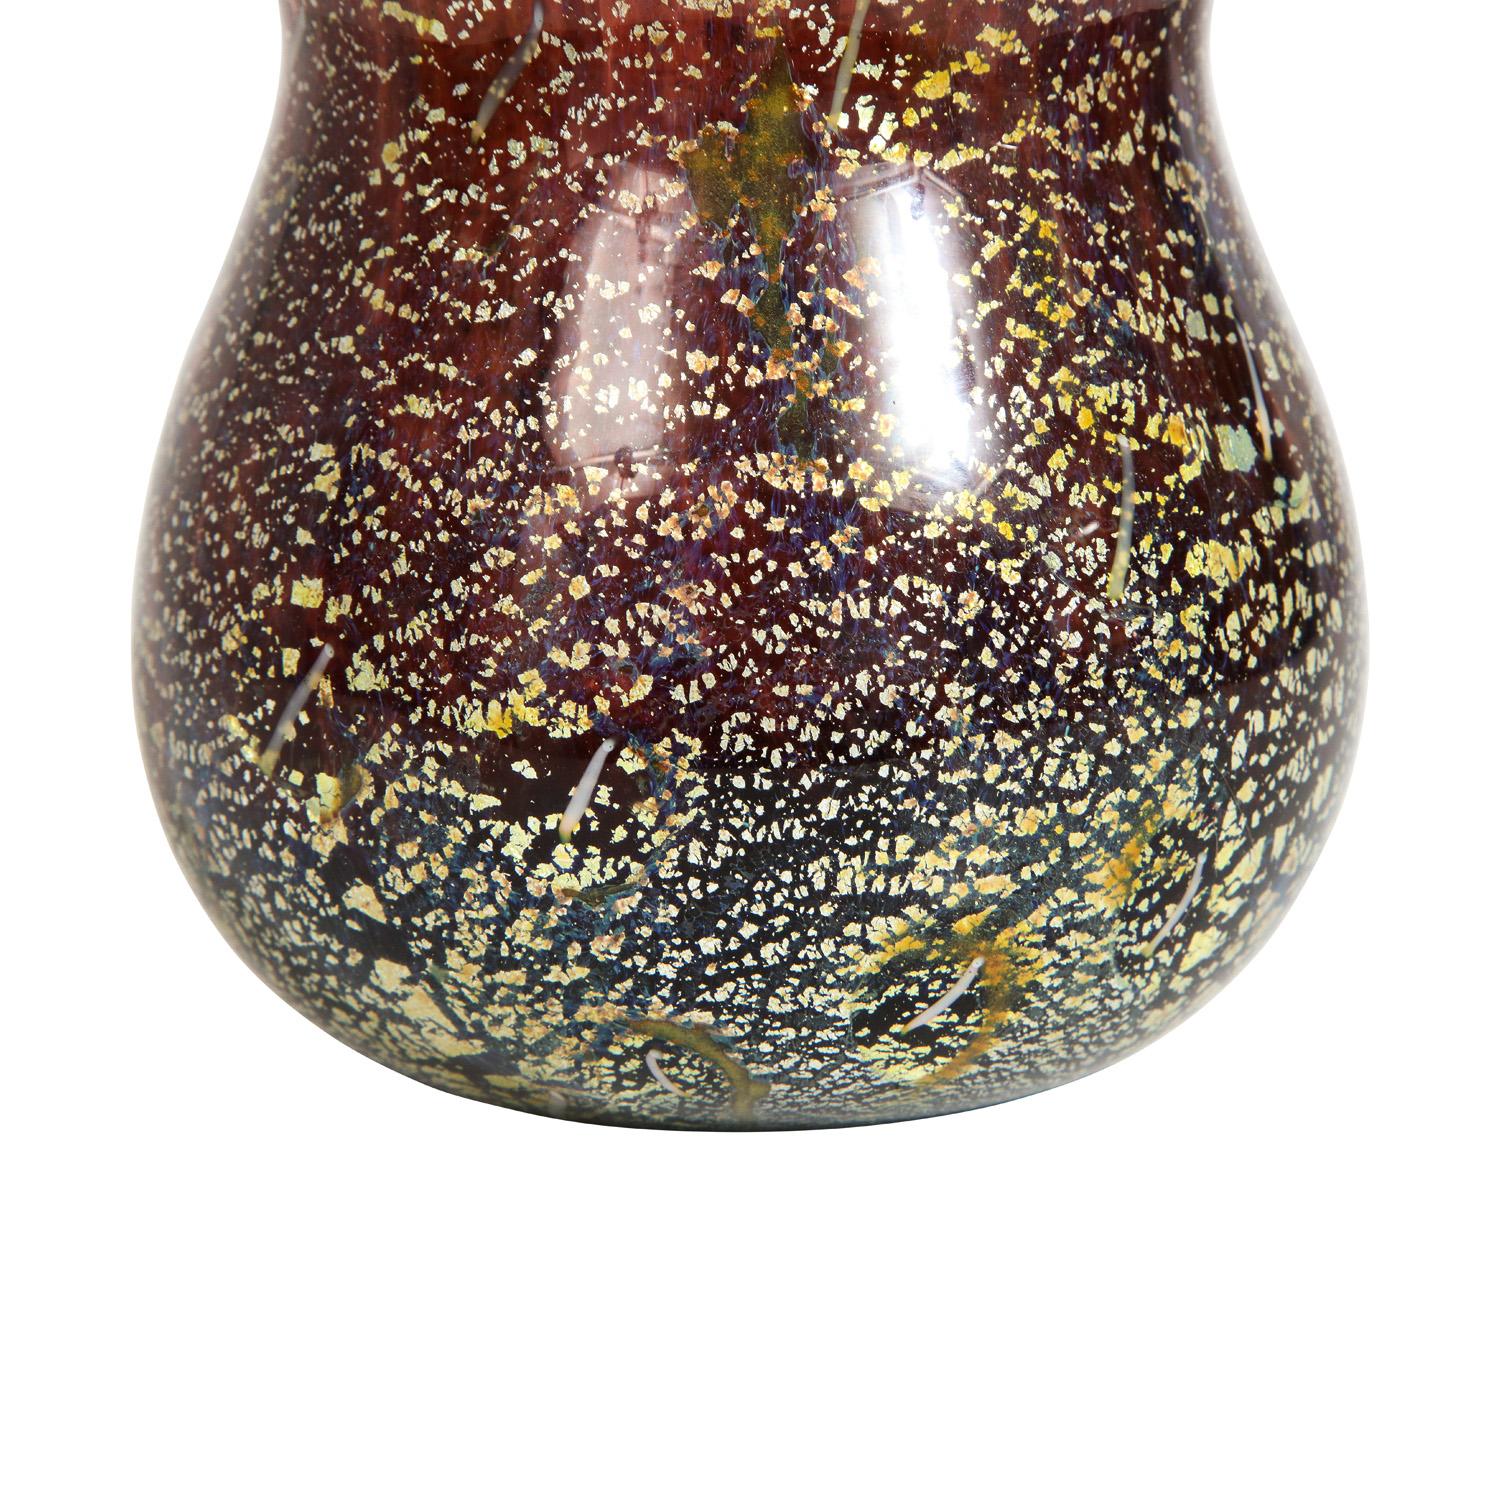 Hand-Crafted Giulio Radi Vase with Gold Foil and Murrhines, ca 1950 For Sale